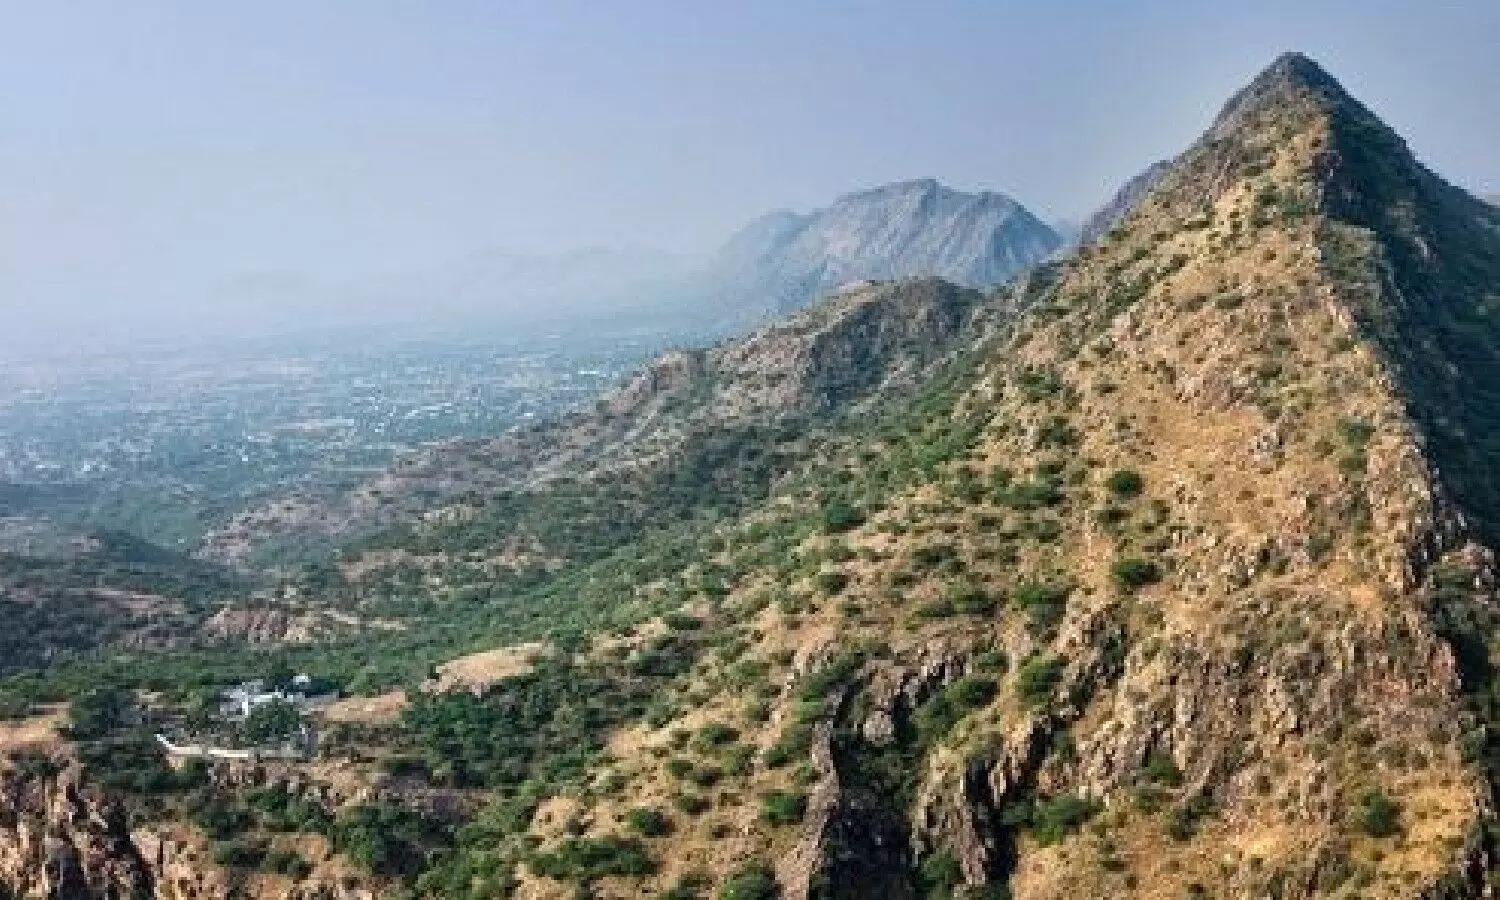 The Supreme Court has issued a strict decree to protect the forest area of ​​the Aravalli hills.